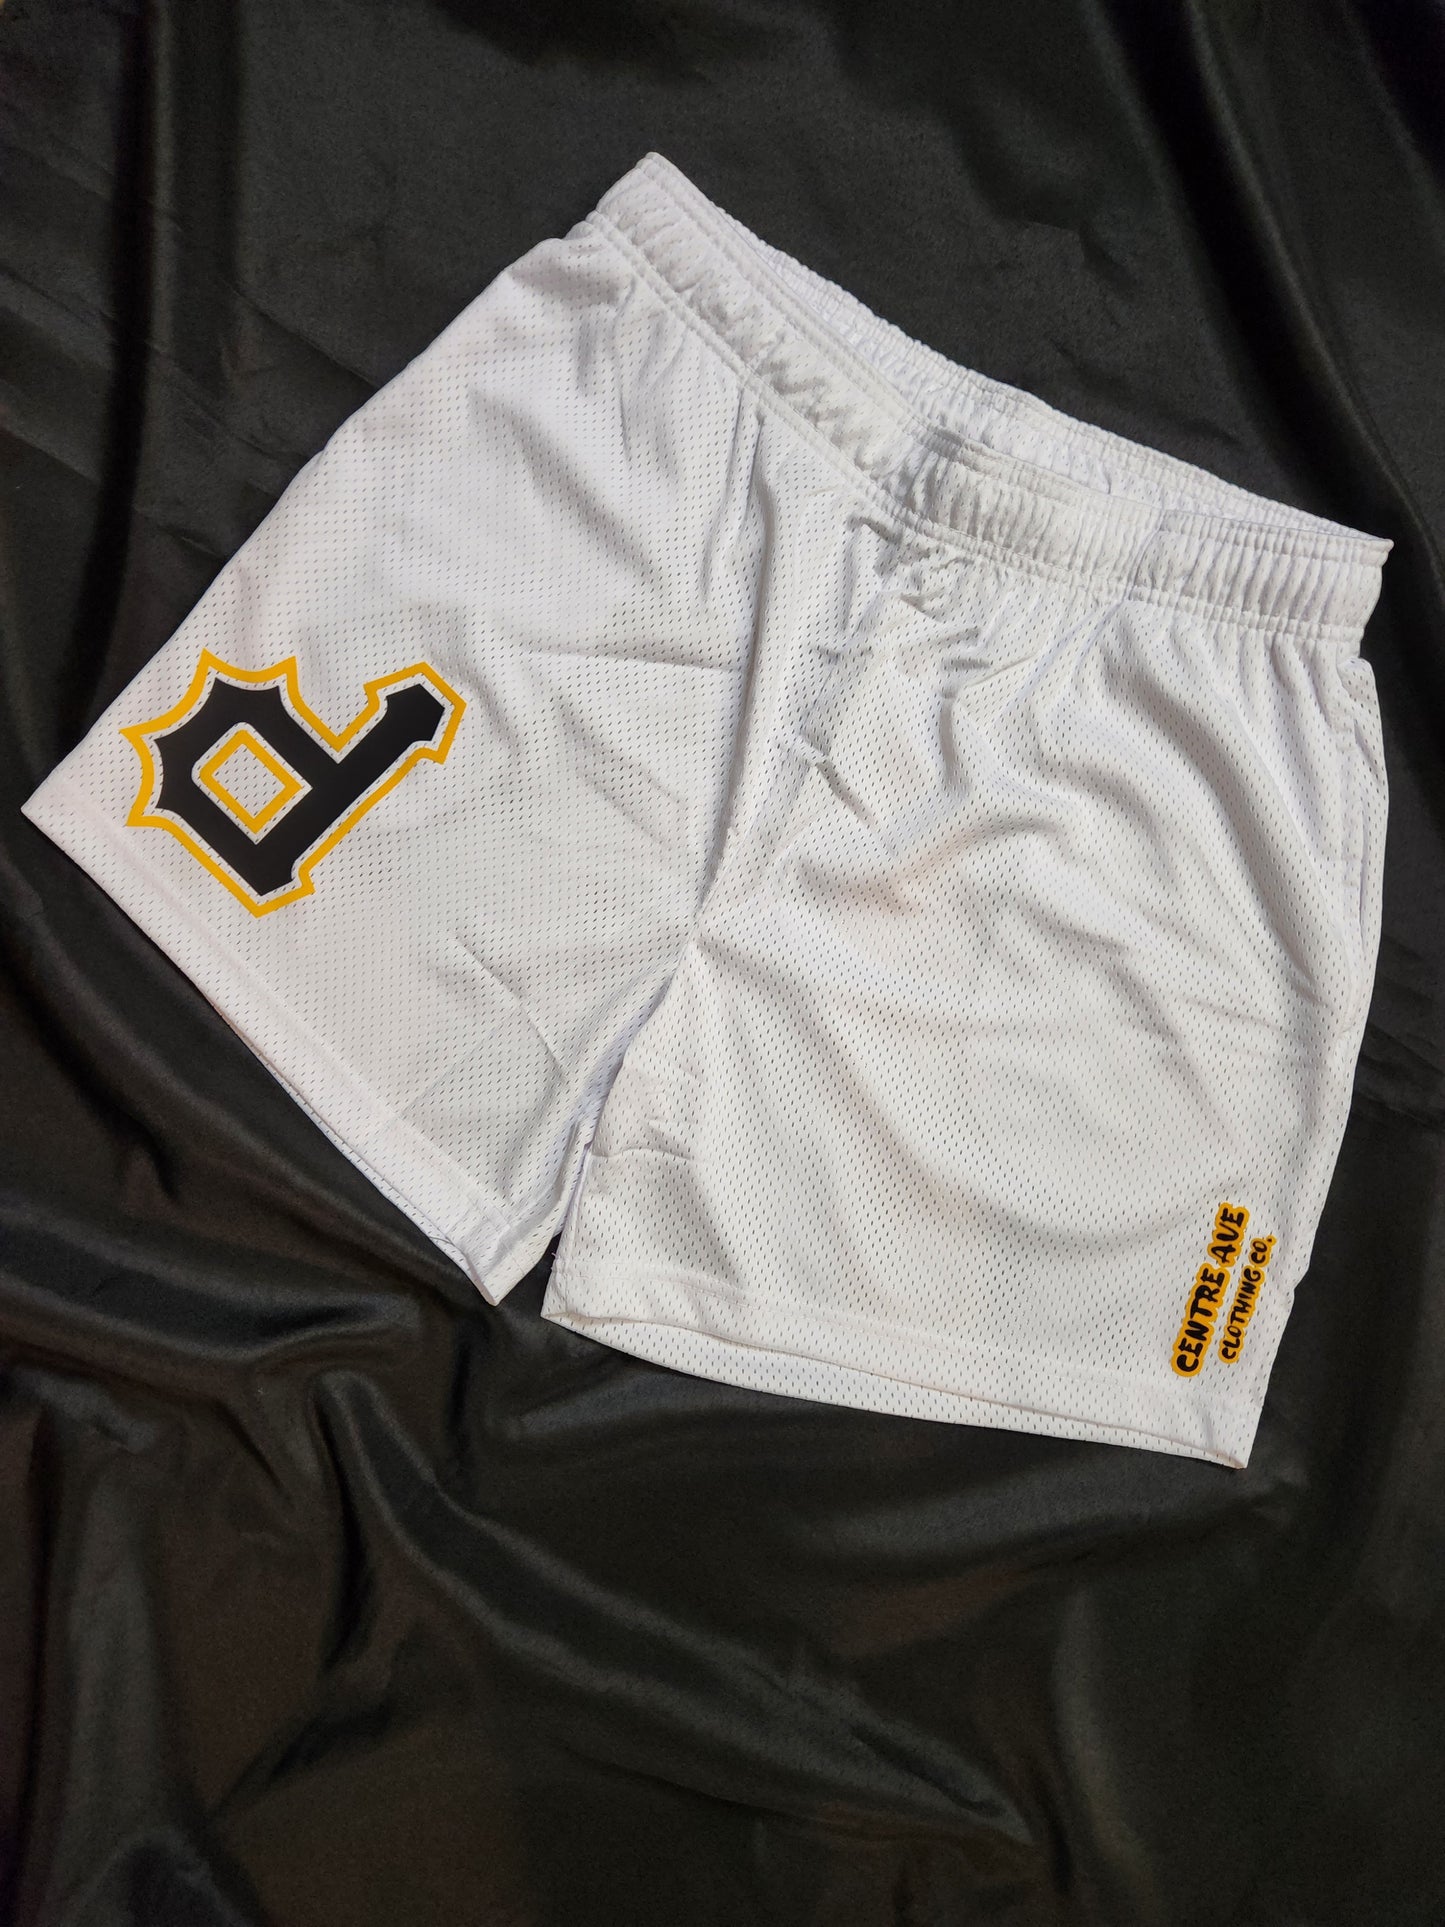 P Mesh Shorts - Centre Ave Clothing Co.